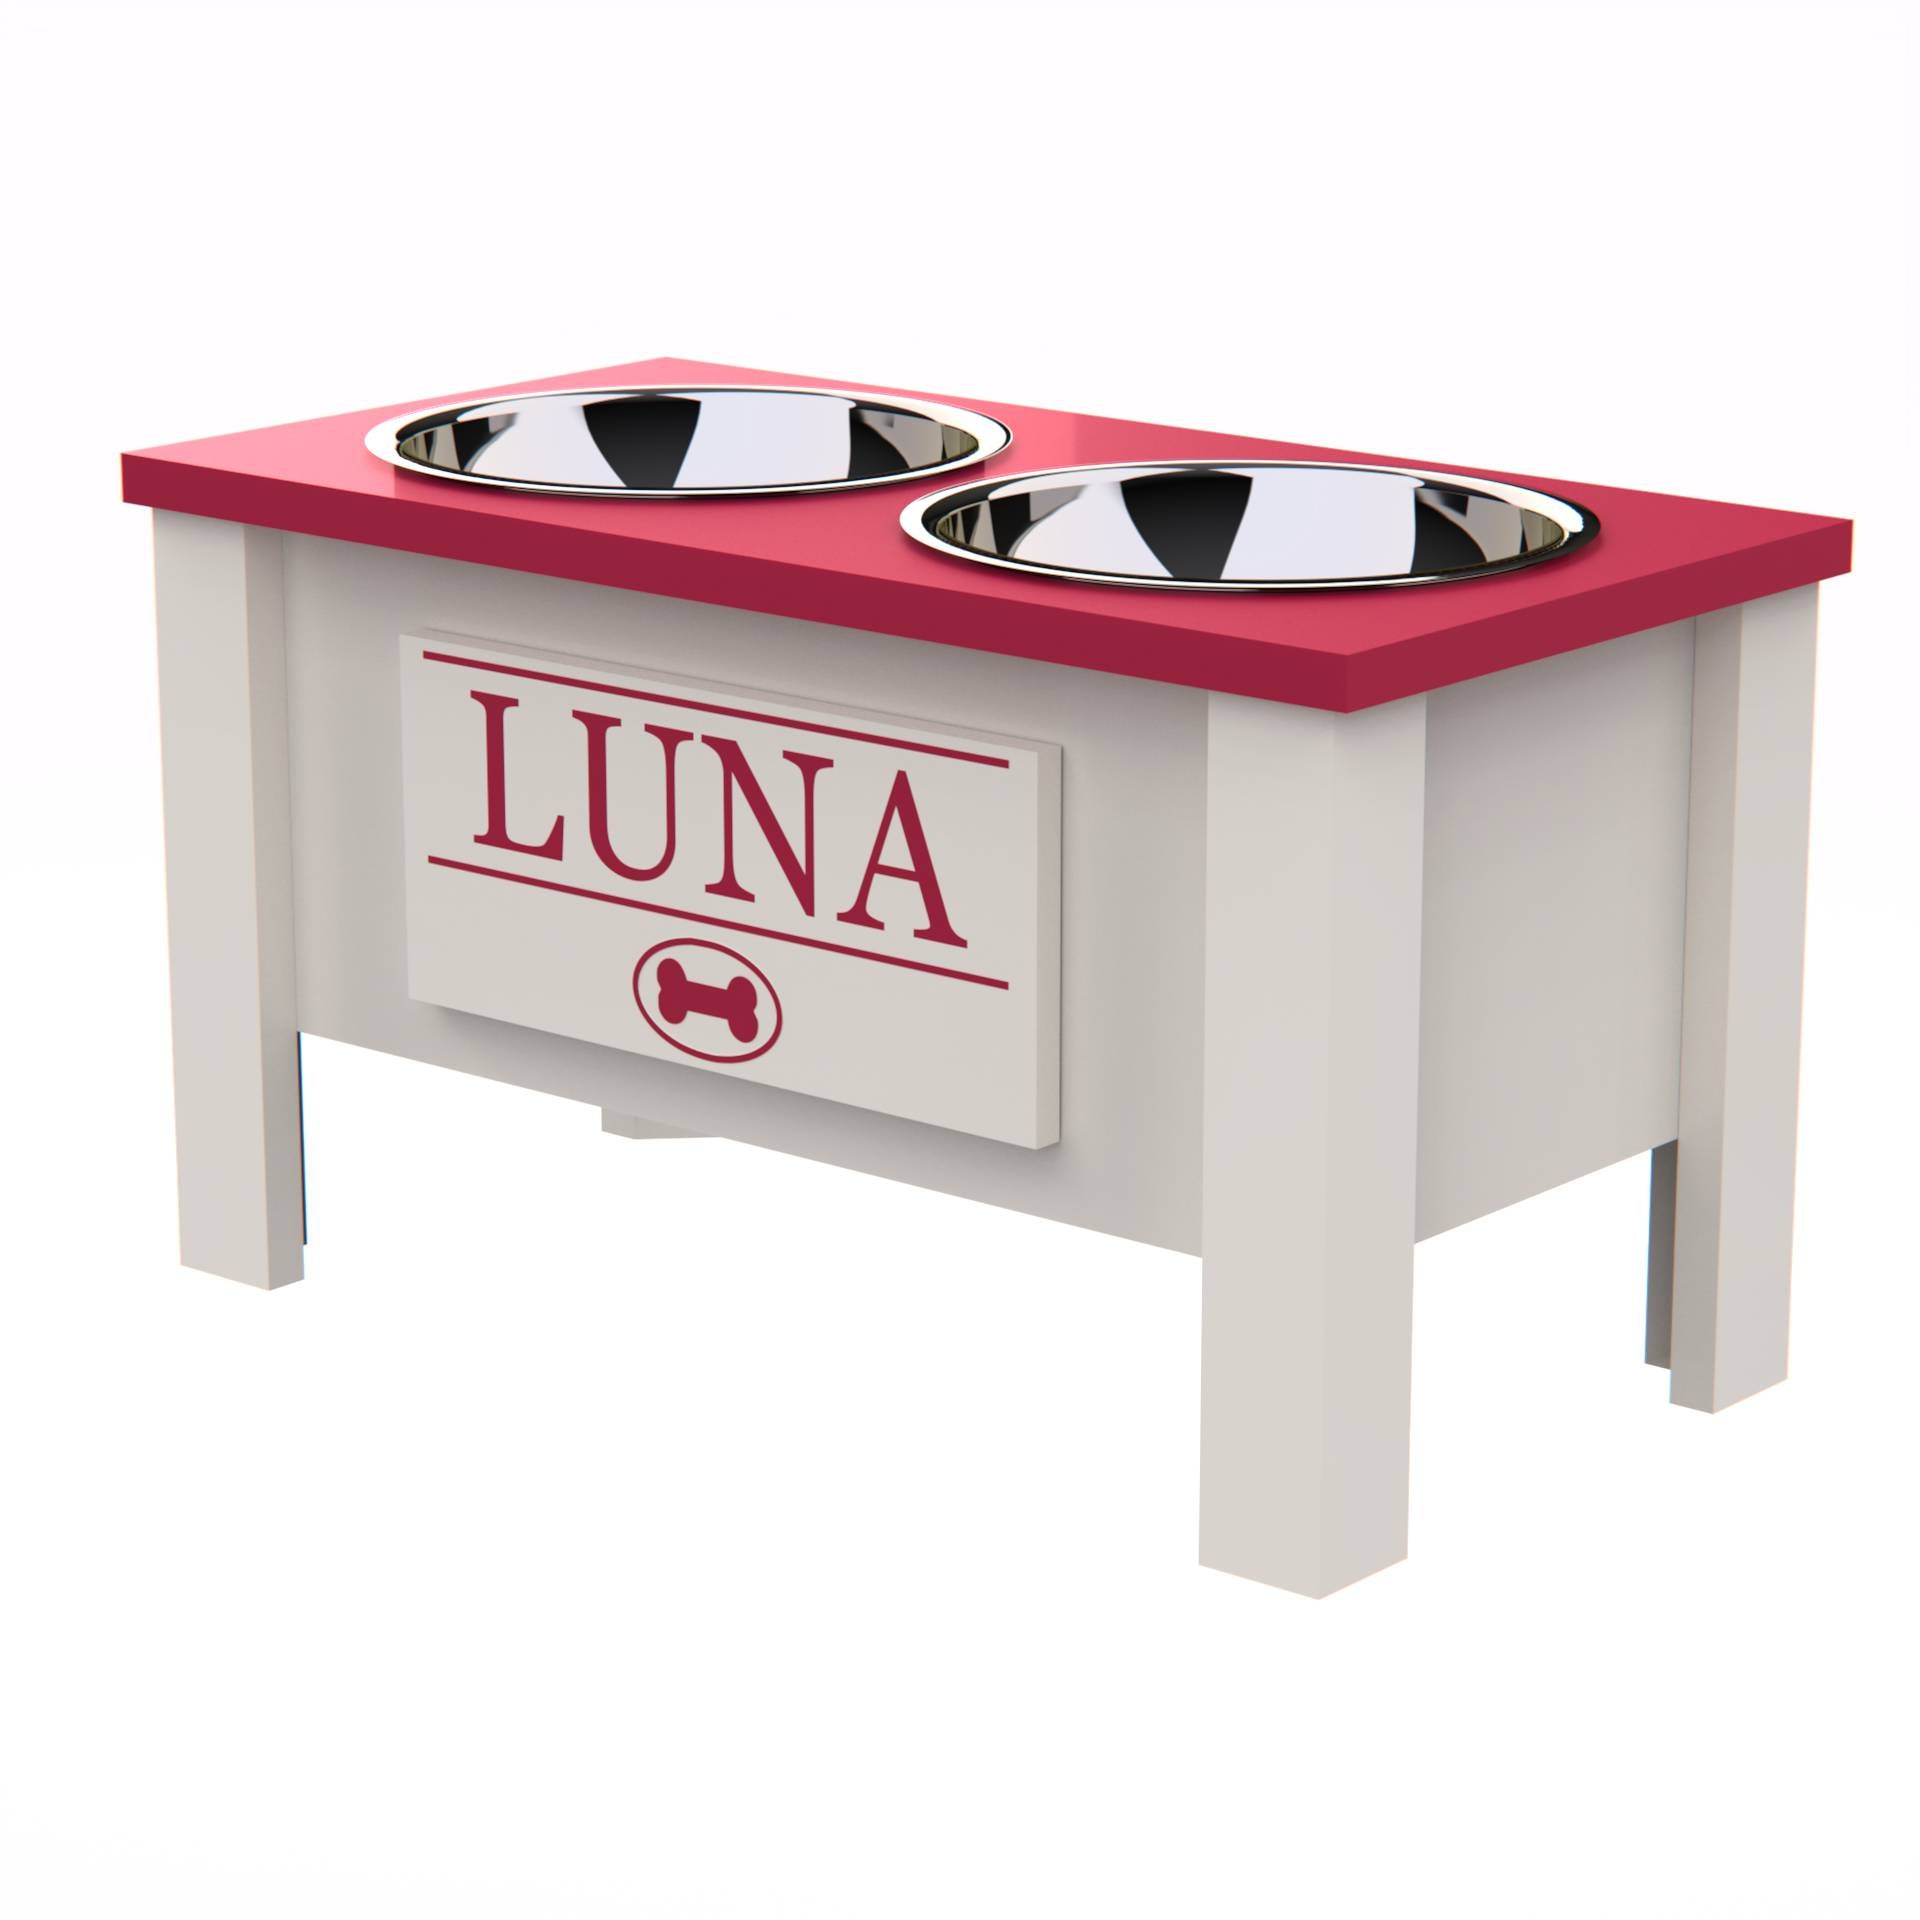 Personalized Elevated Dog Bowl Stand with Internal Storage - Pink